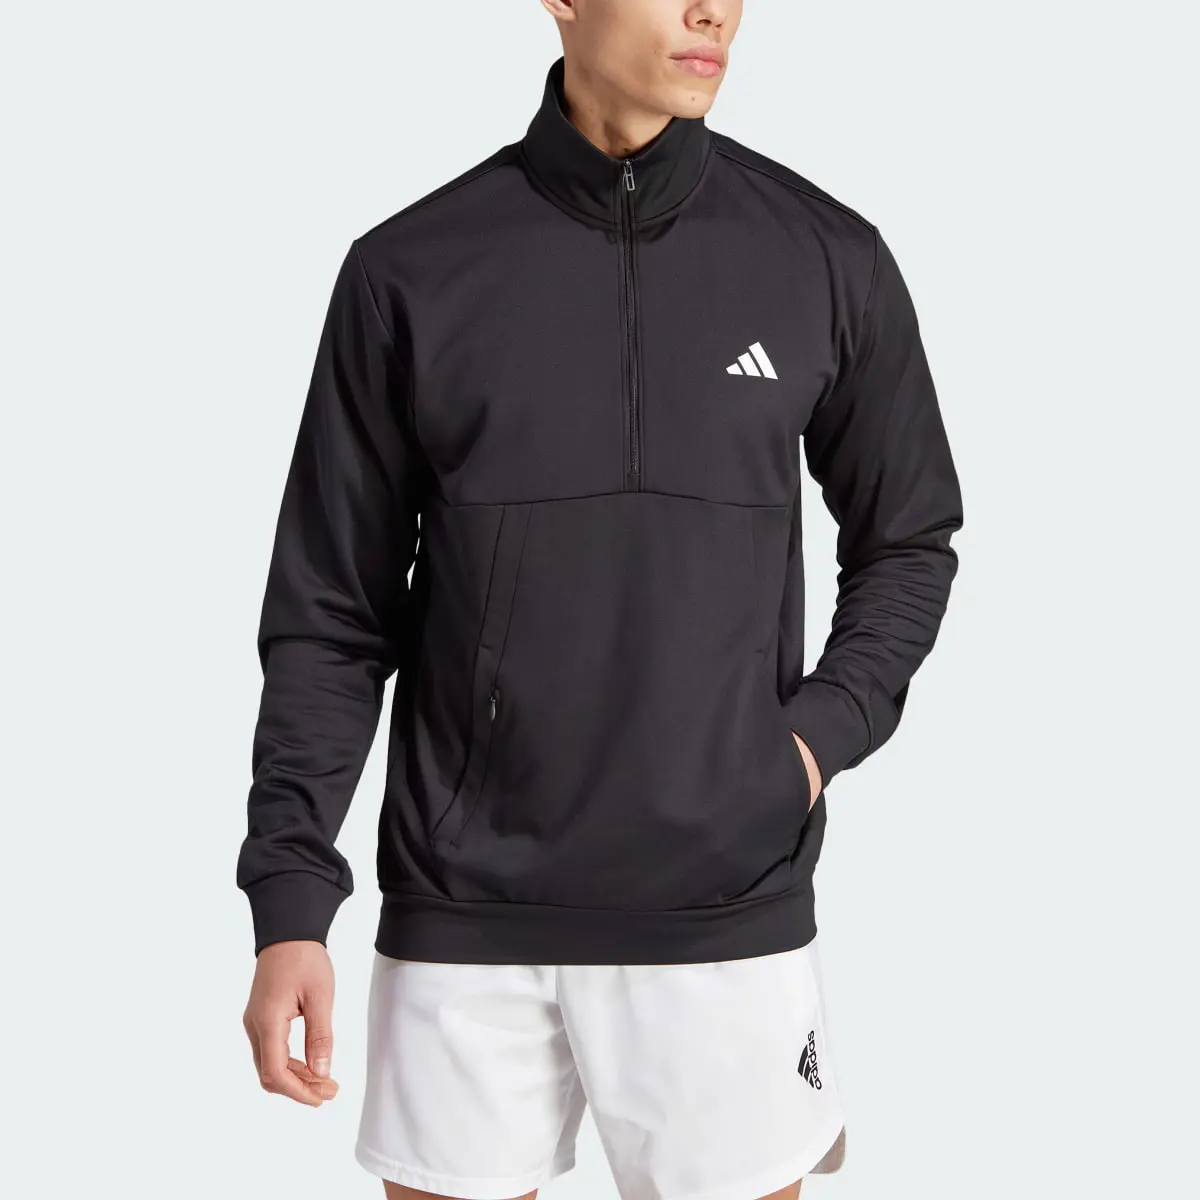 Adidas Game and Go Small Logo Training 1/4 Zip Top. 1